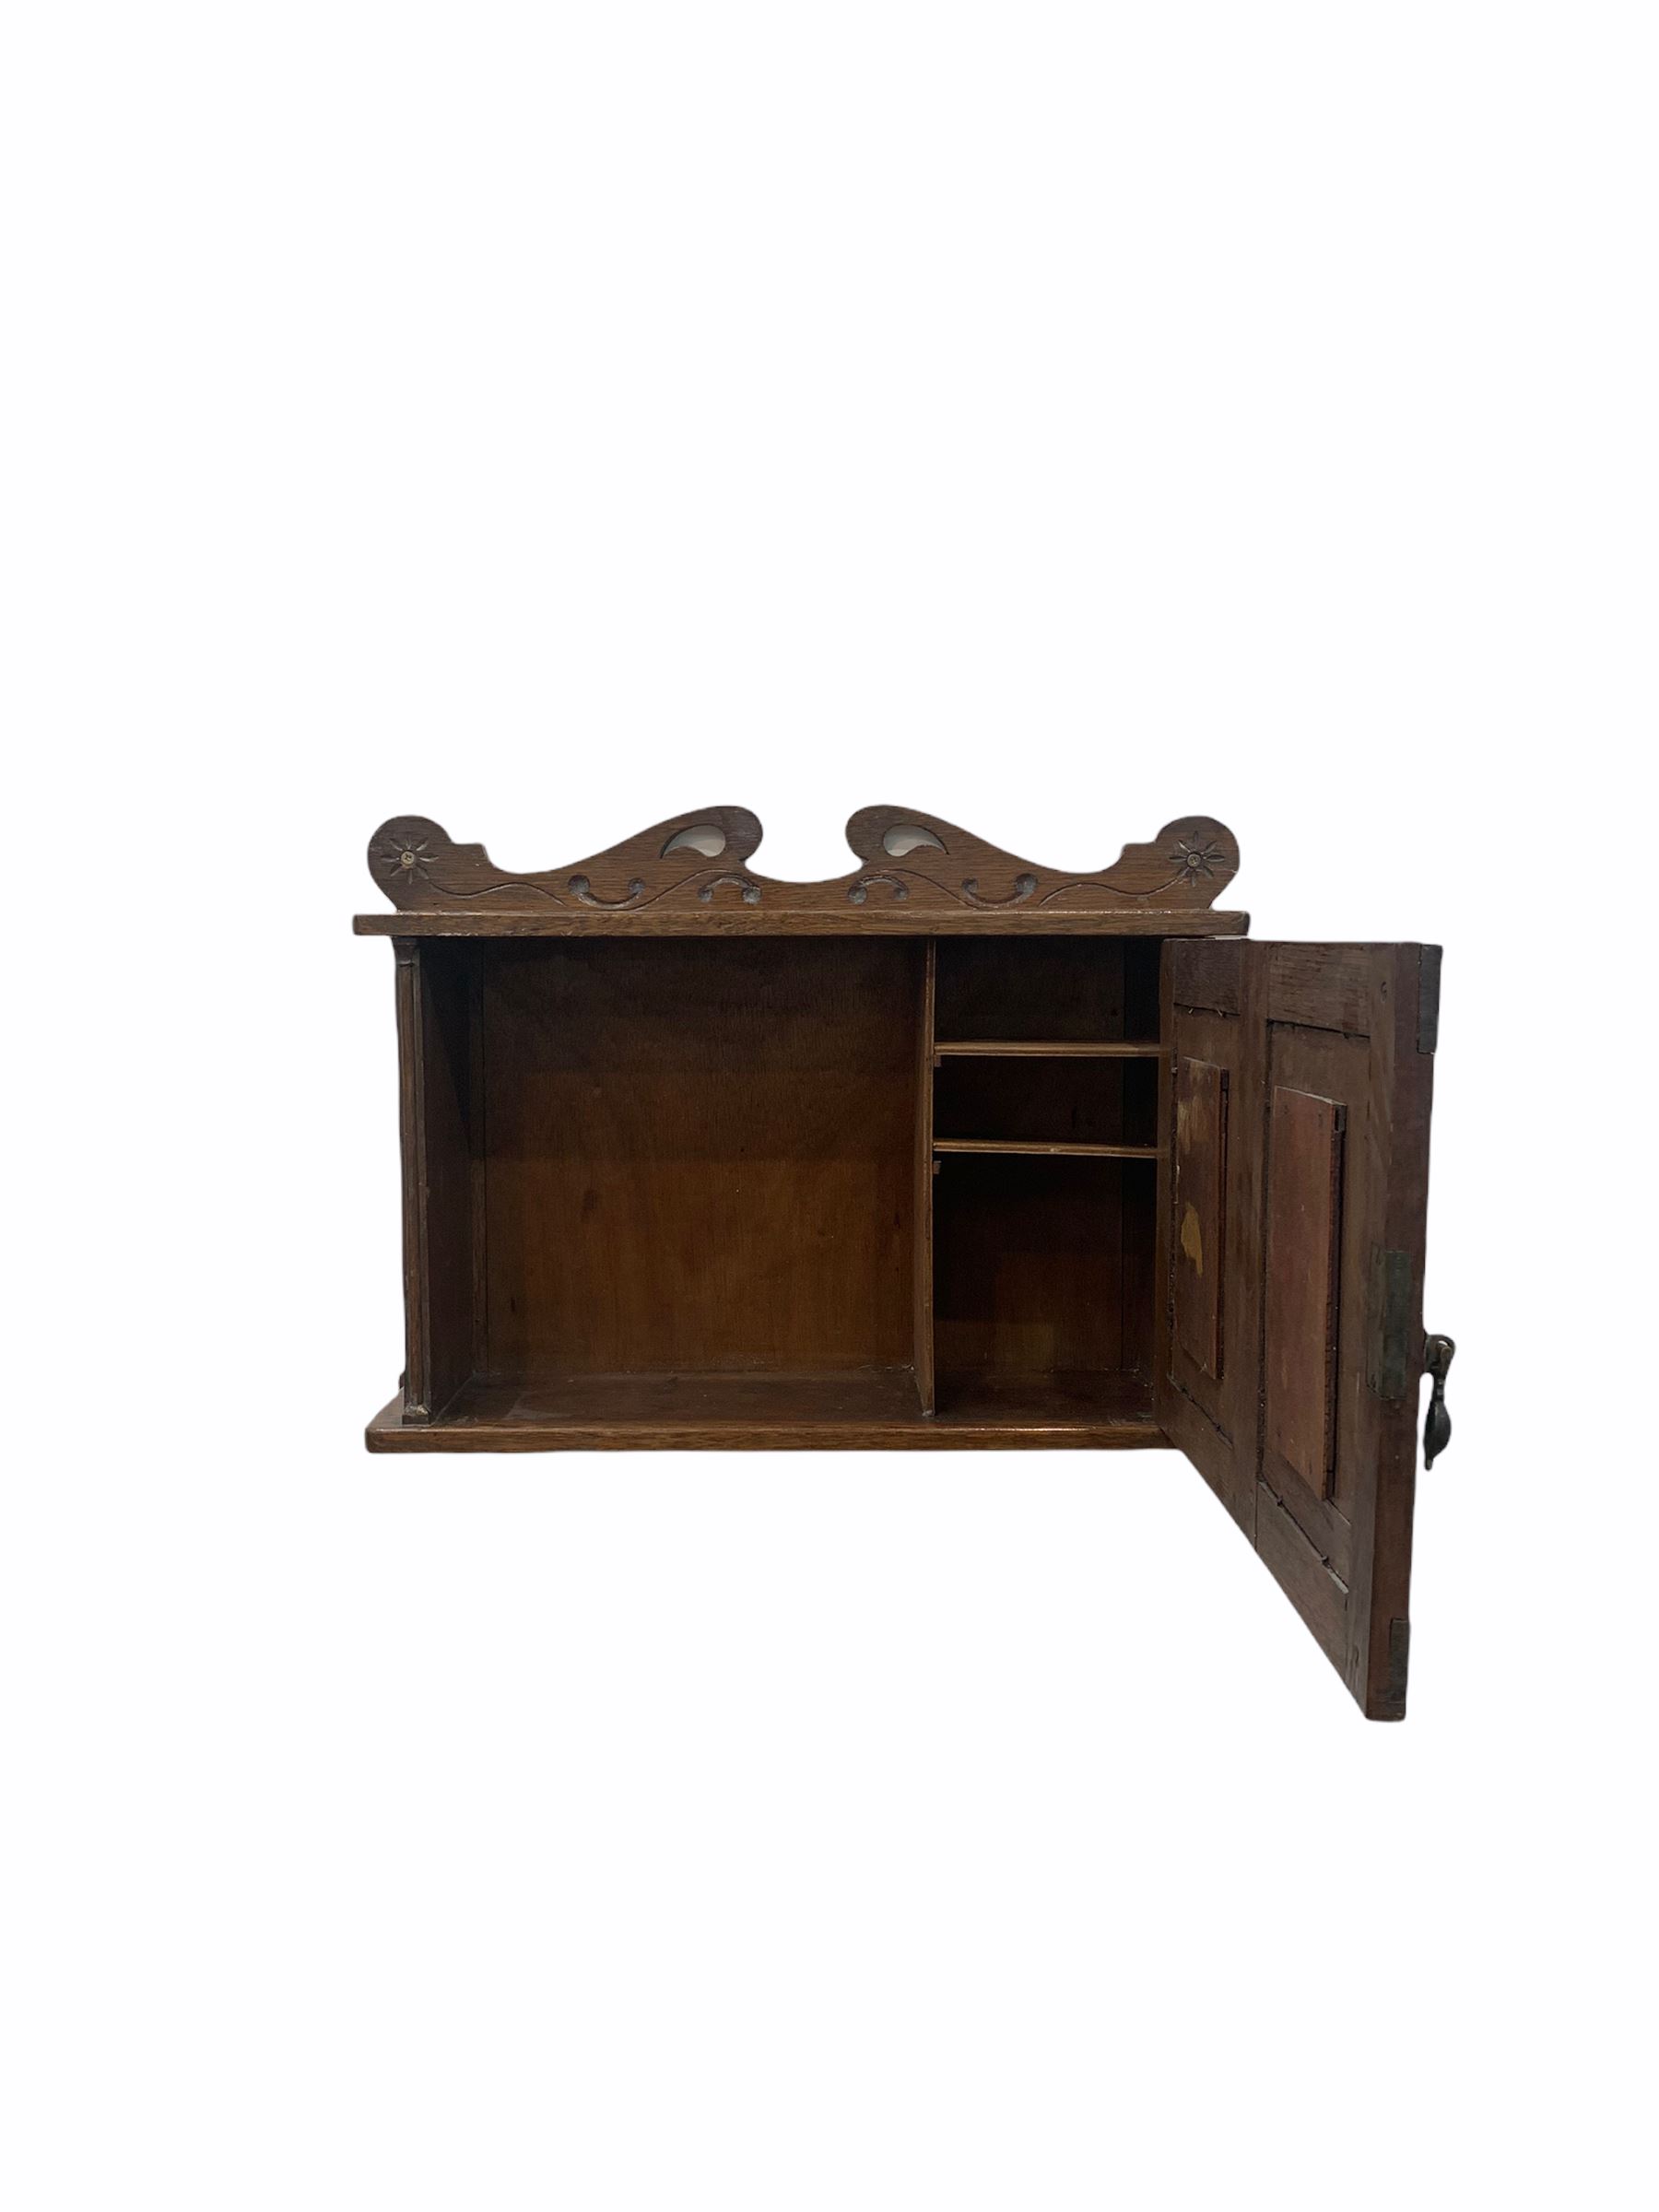 Early 20th century art nouveau period oak wall hanging cabinet - Image 2 of 4